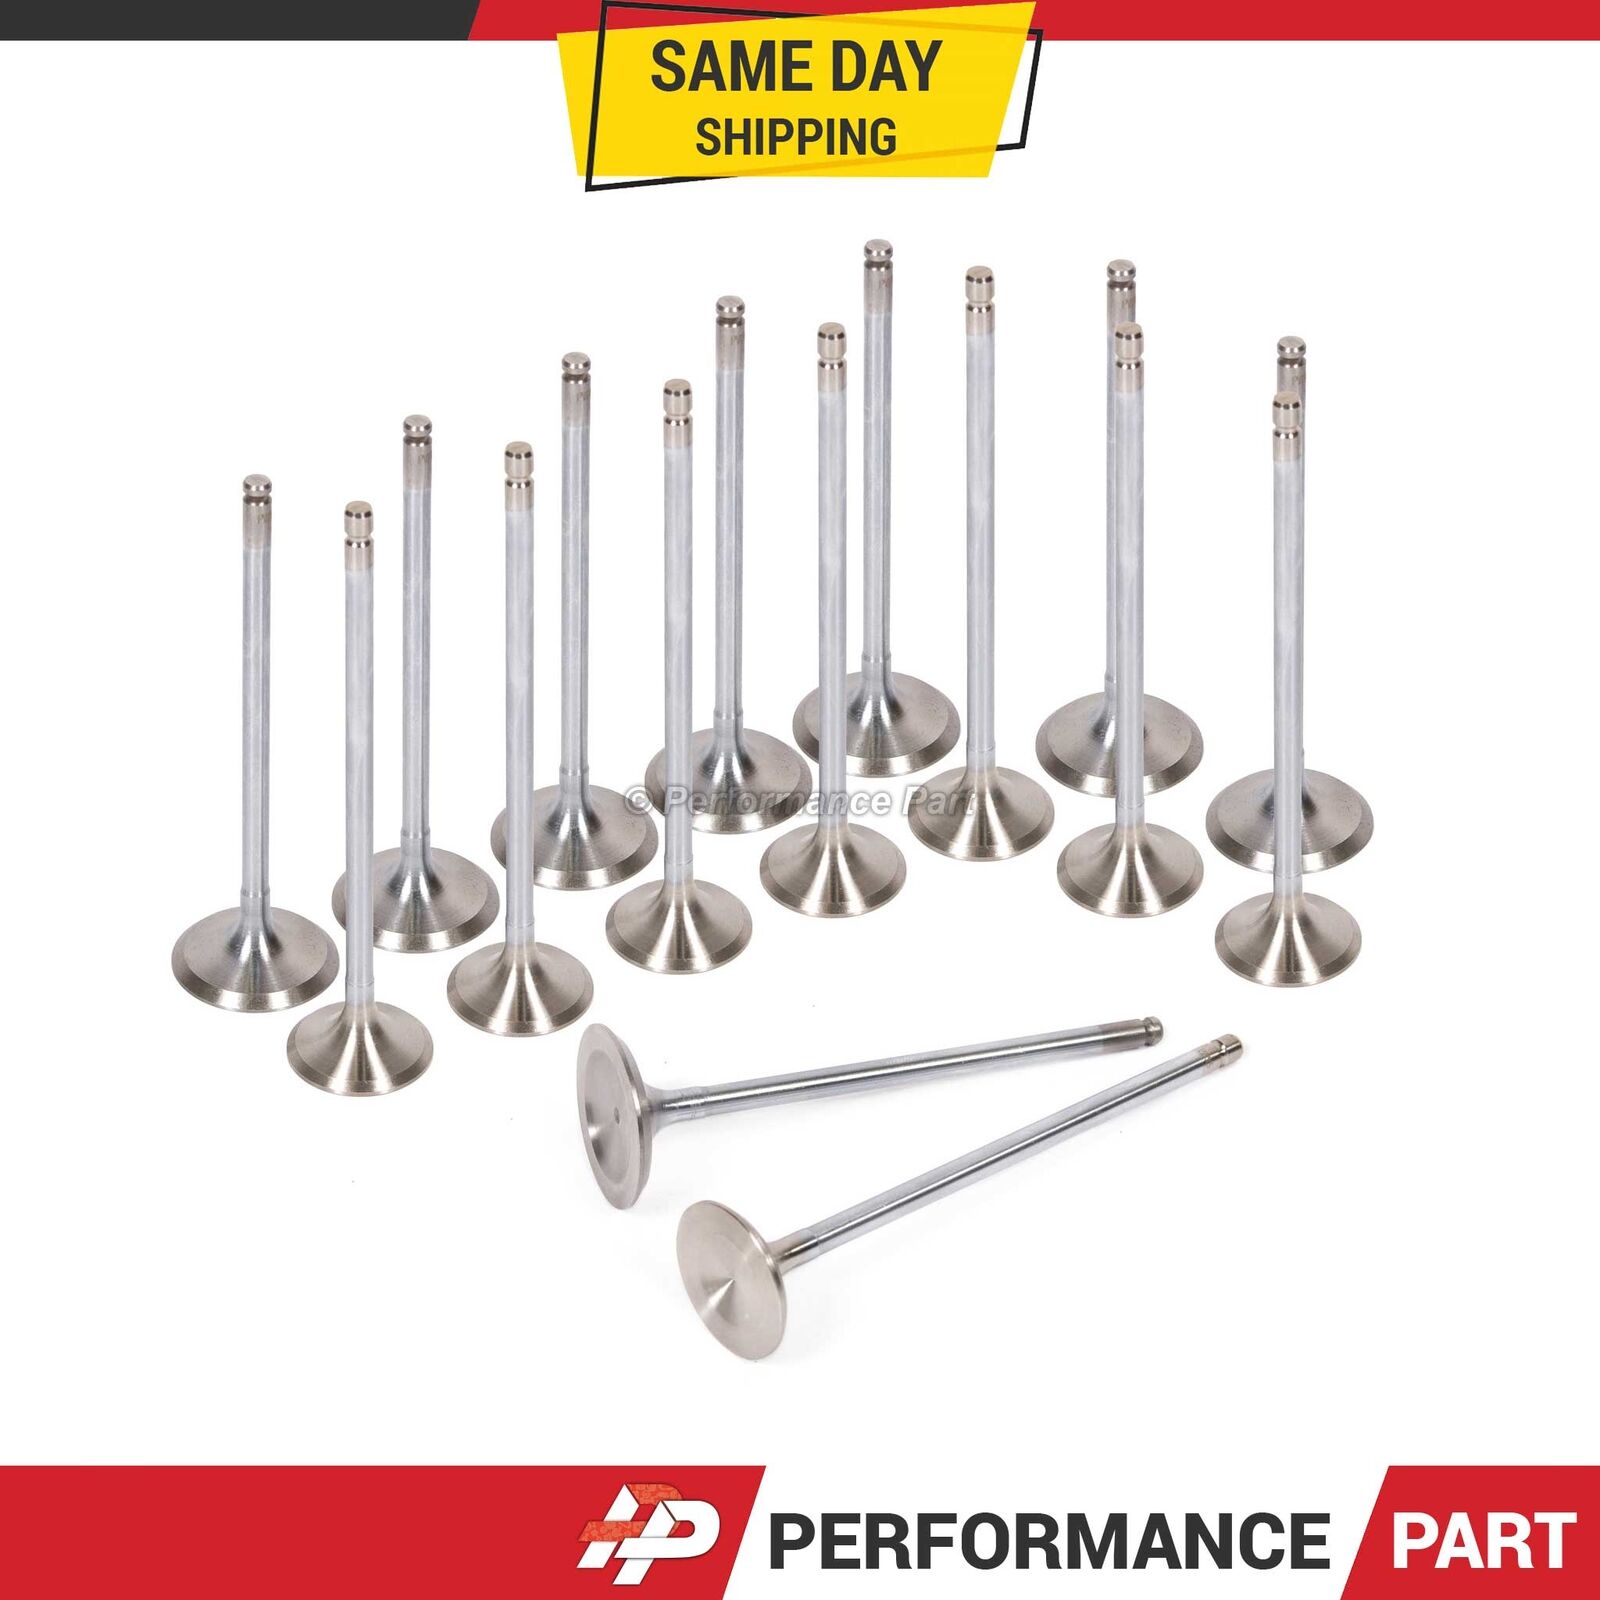 Intake Exhaust Valves for 91-96 Honda Accord Prelude 2.2L SOHC F22A1 F22A4 F22A6